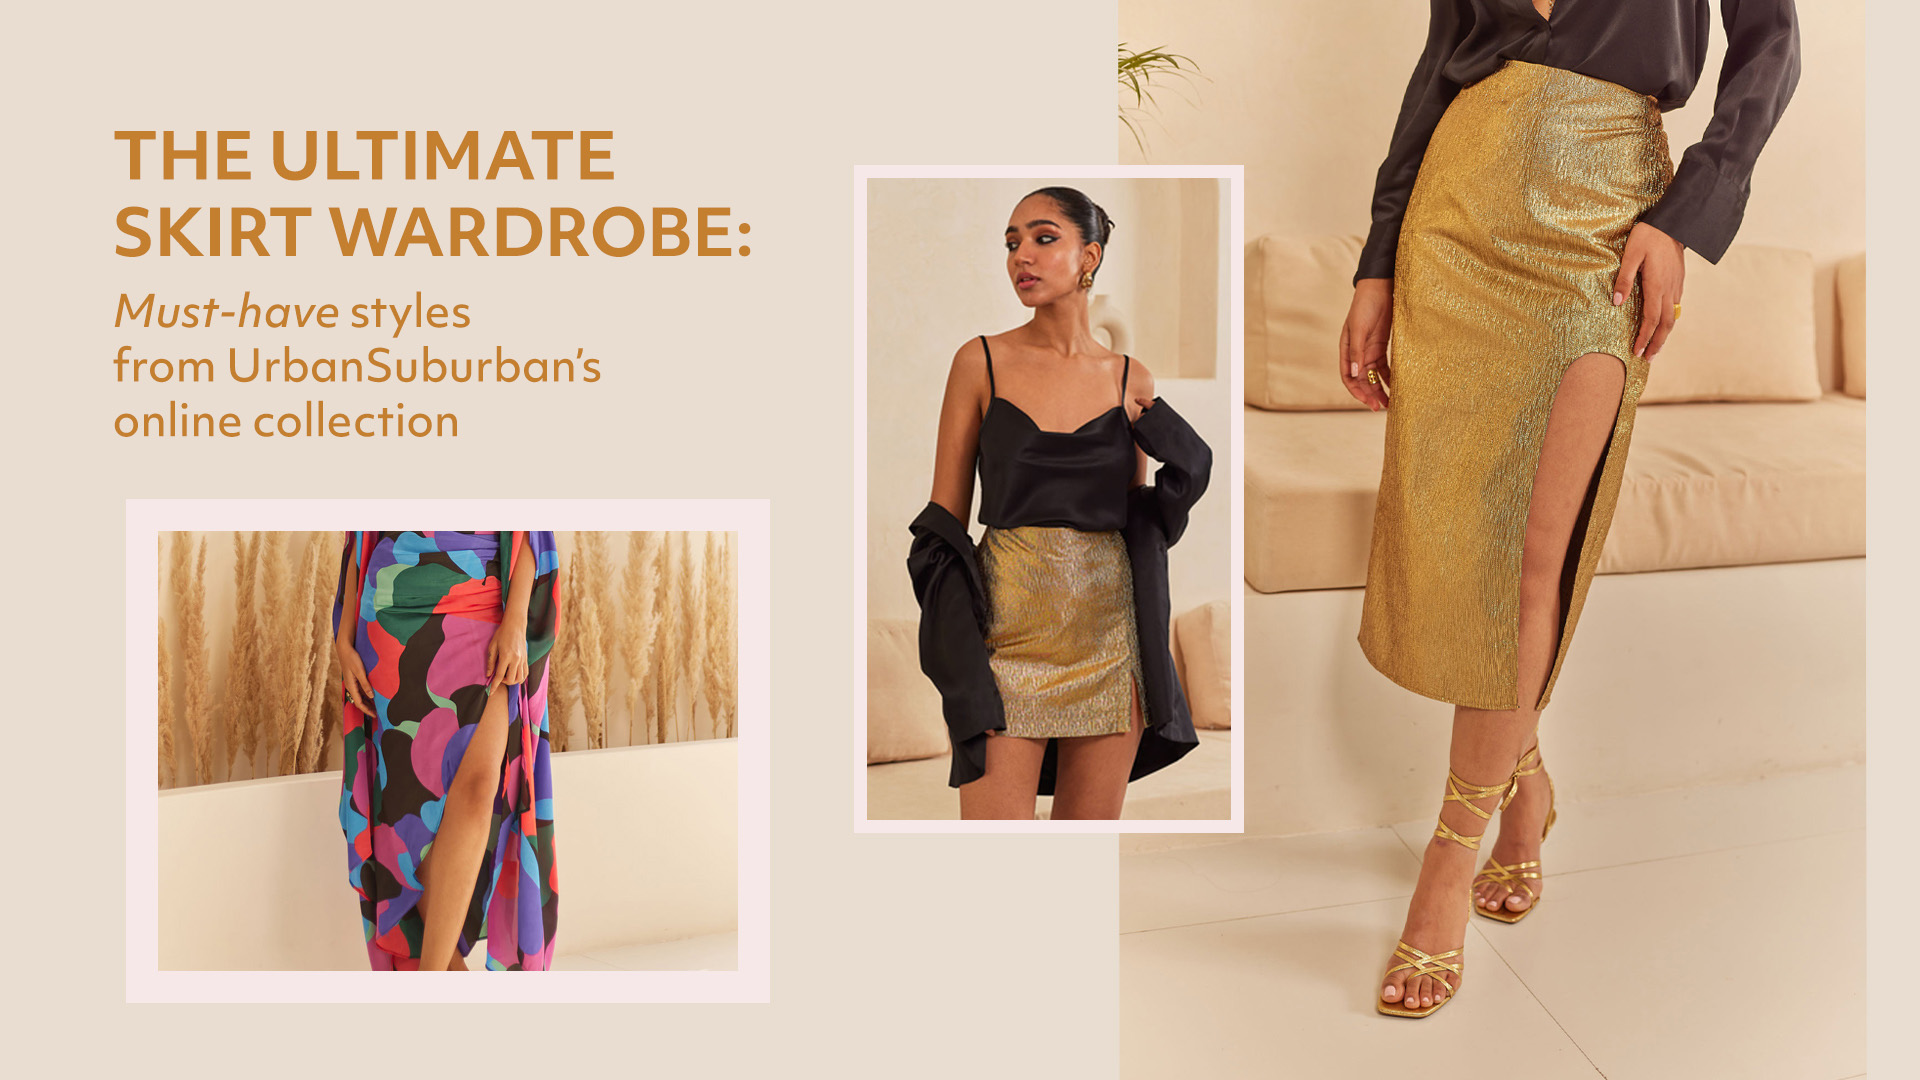 The Ultimate Skirt Wardrobe: Must-Have Styles from Urban Suburban's Online Collection